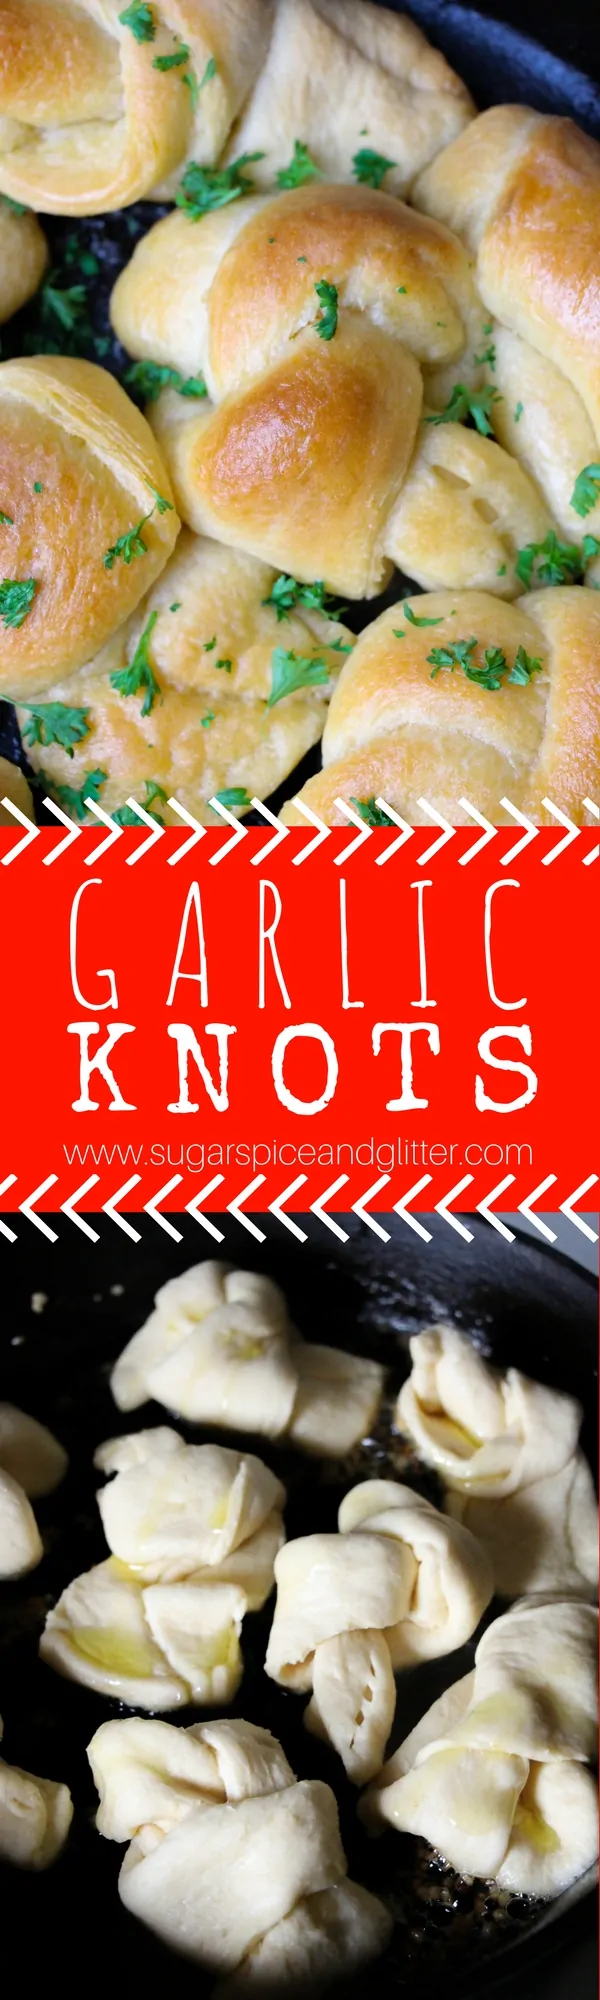 How to make Crescent Roll Garlic Knots - buttery, garlicky bread rolls that pair perfectly with your favorite pasta dishes or soups